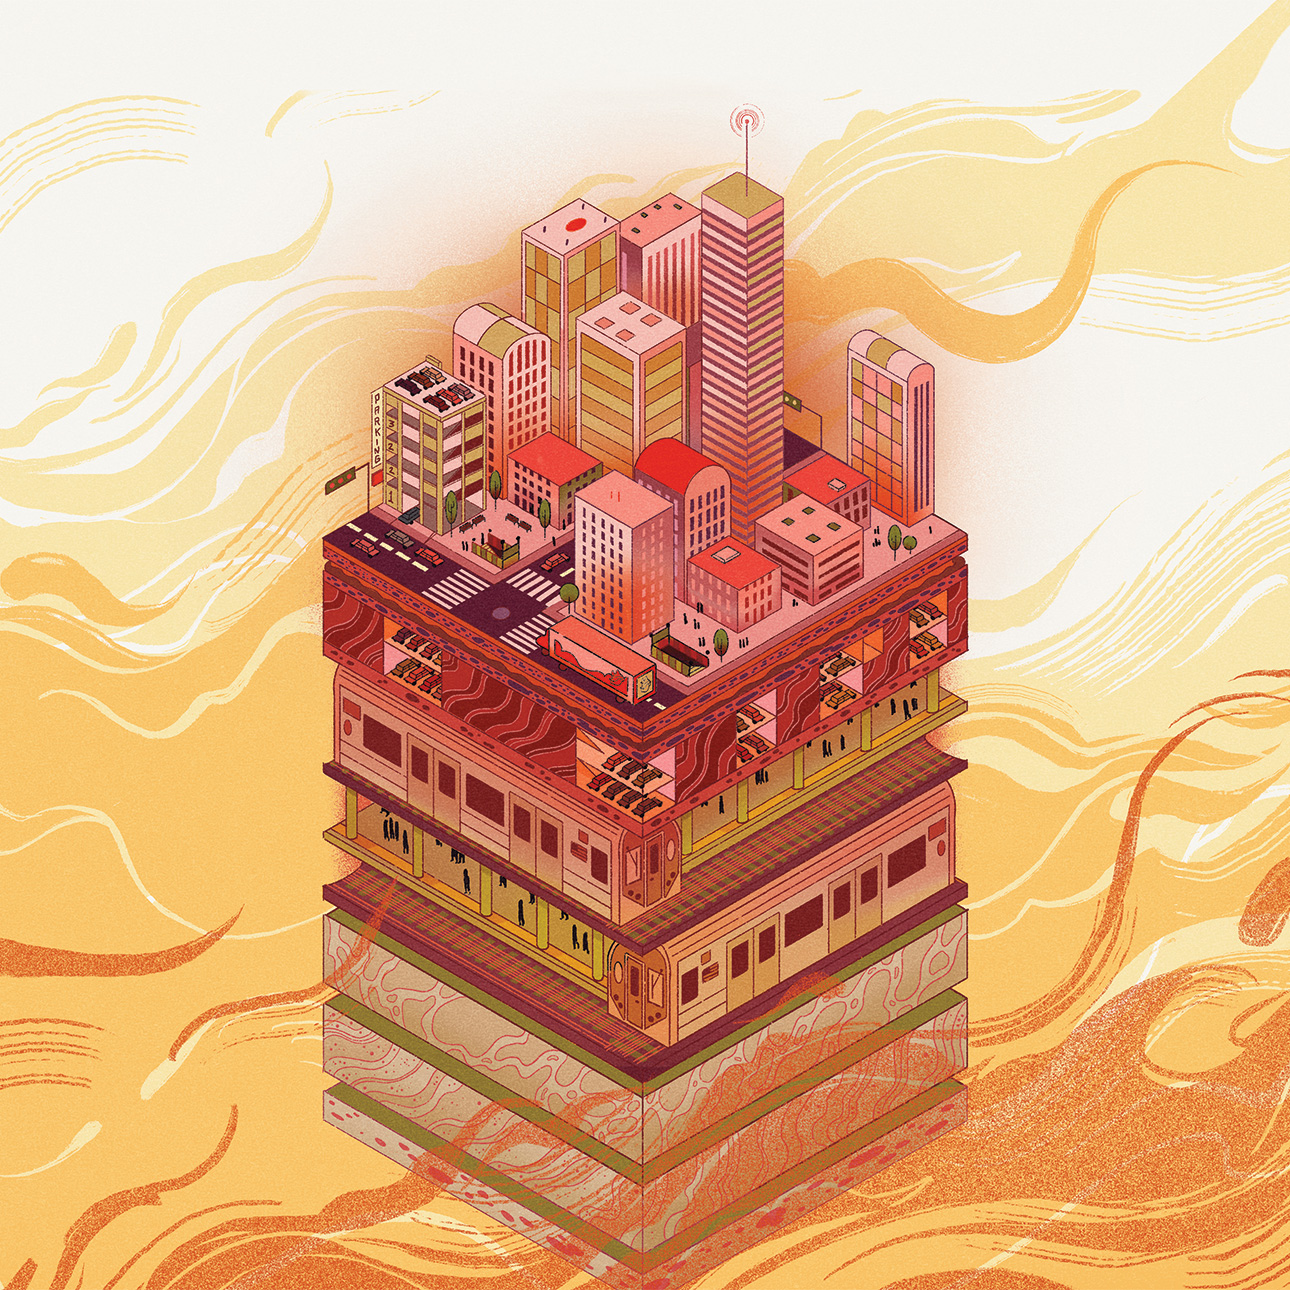 A warmly colored illustration shows a city and its underneath layers, with abstract flames surrounding it.